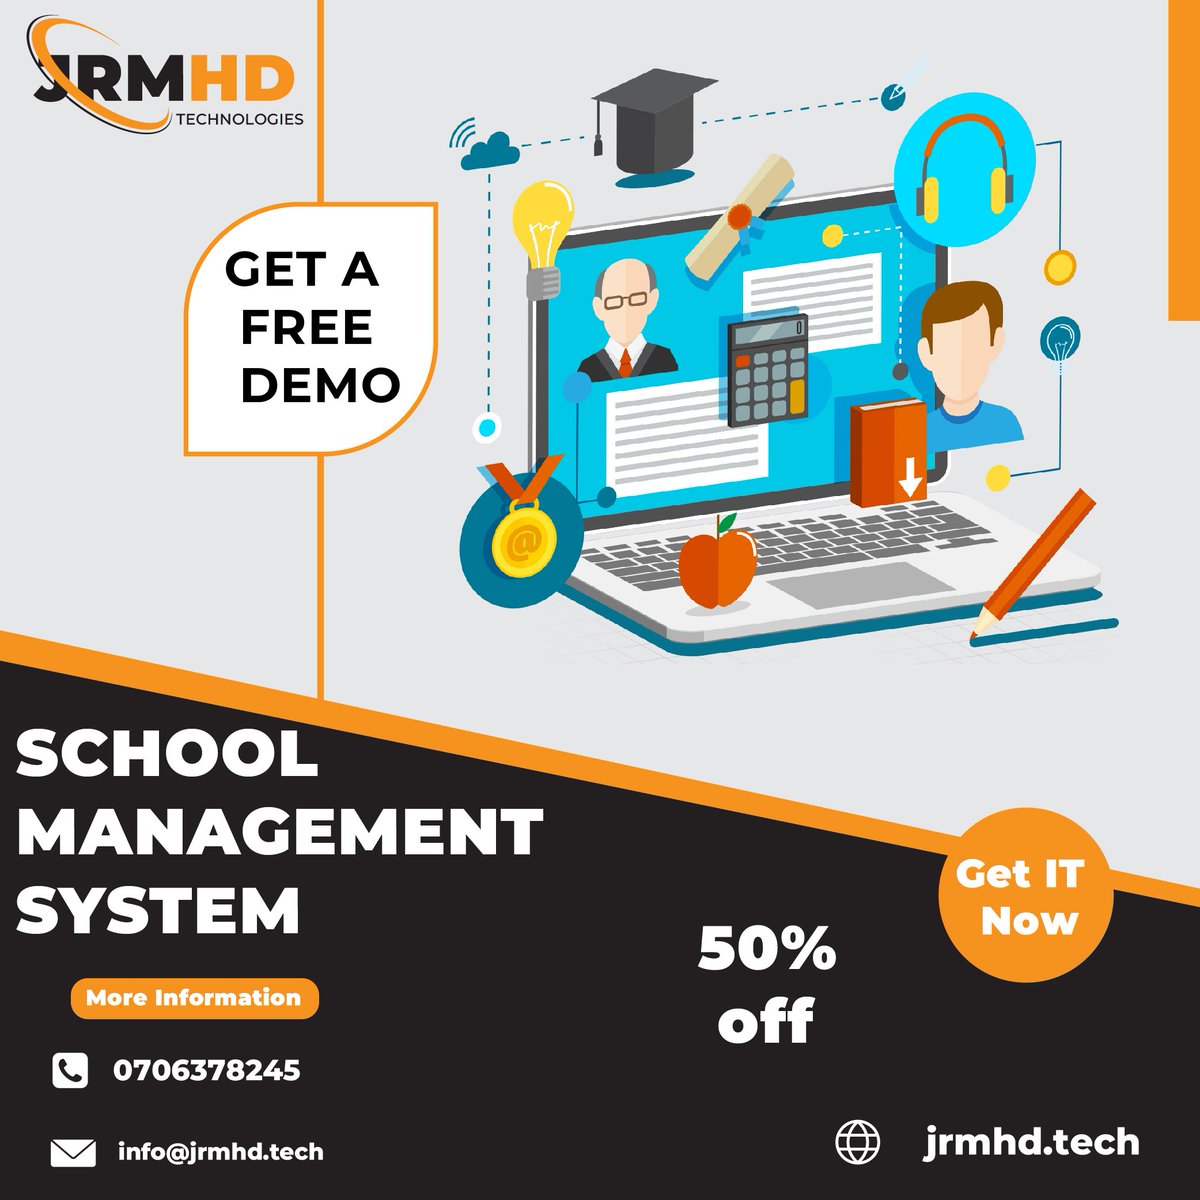 Enhance your school's operations with our advanced School Management System! 📚💻 Streamline administration, communication, and more. Contact us at info@jrmhd.tech or 📞 0706378245 to learn more!
jrmhd.tech 

 #SchoolManagement Boina Yemen Gaza Havi Eastleigh